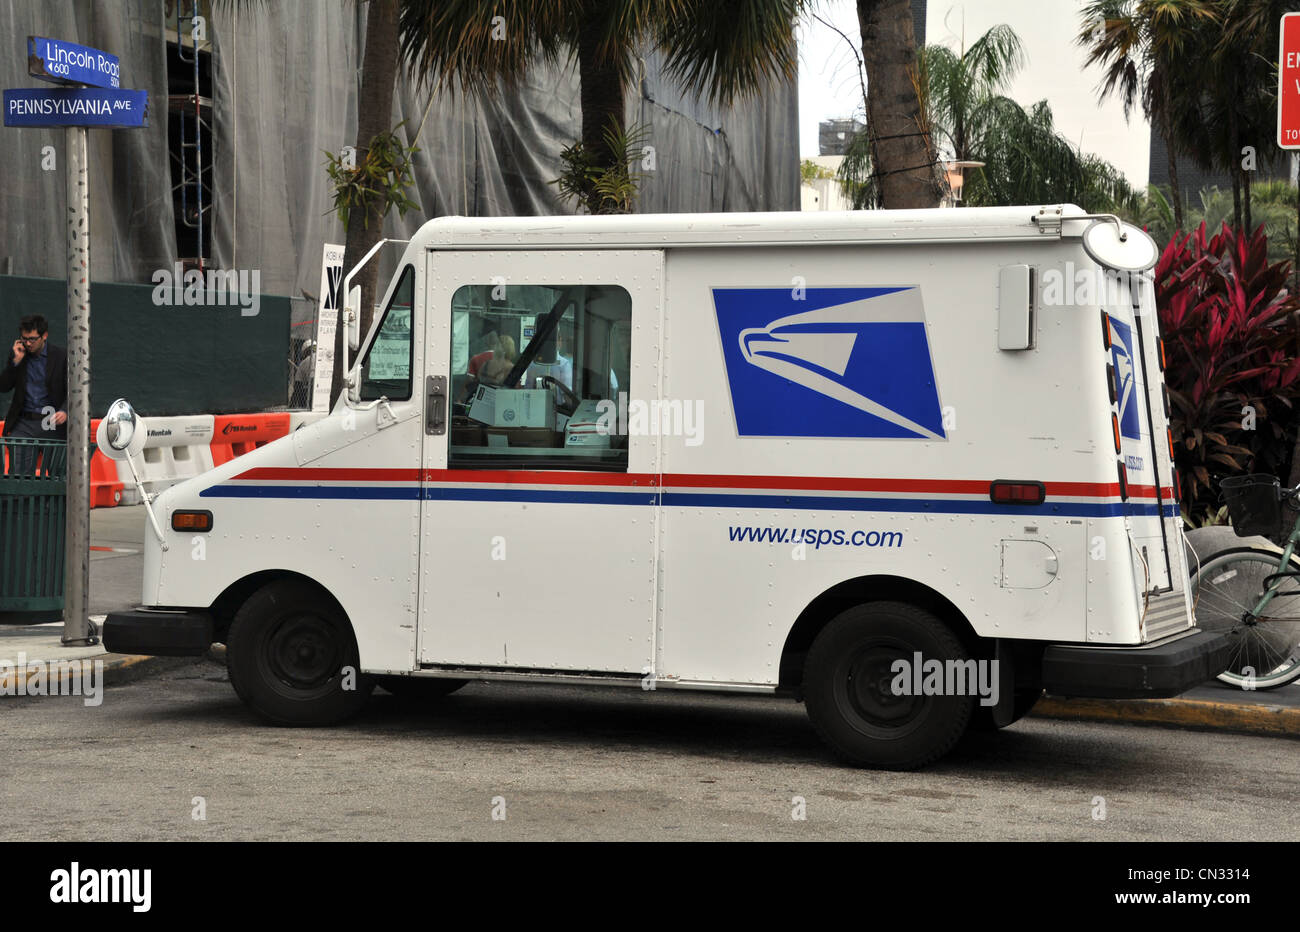 United States Postal Service delivery van, USA Stock Photo